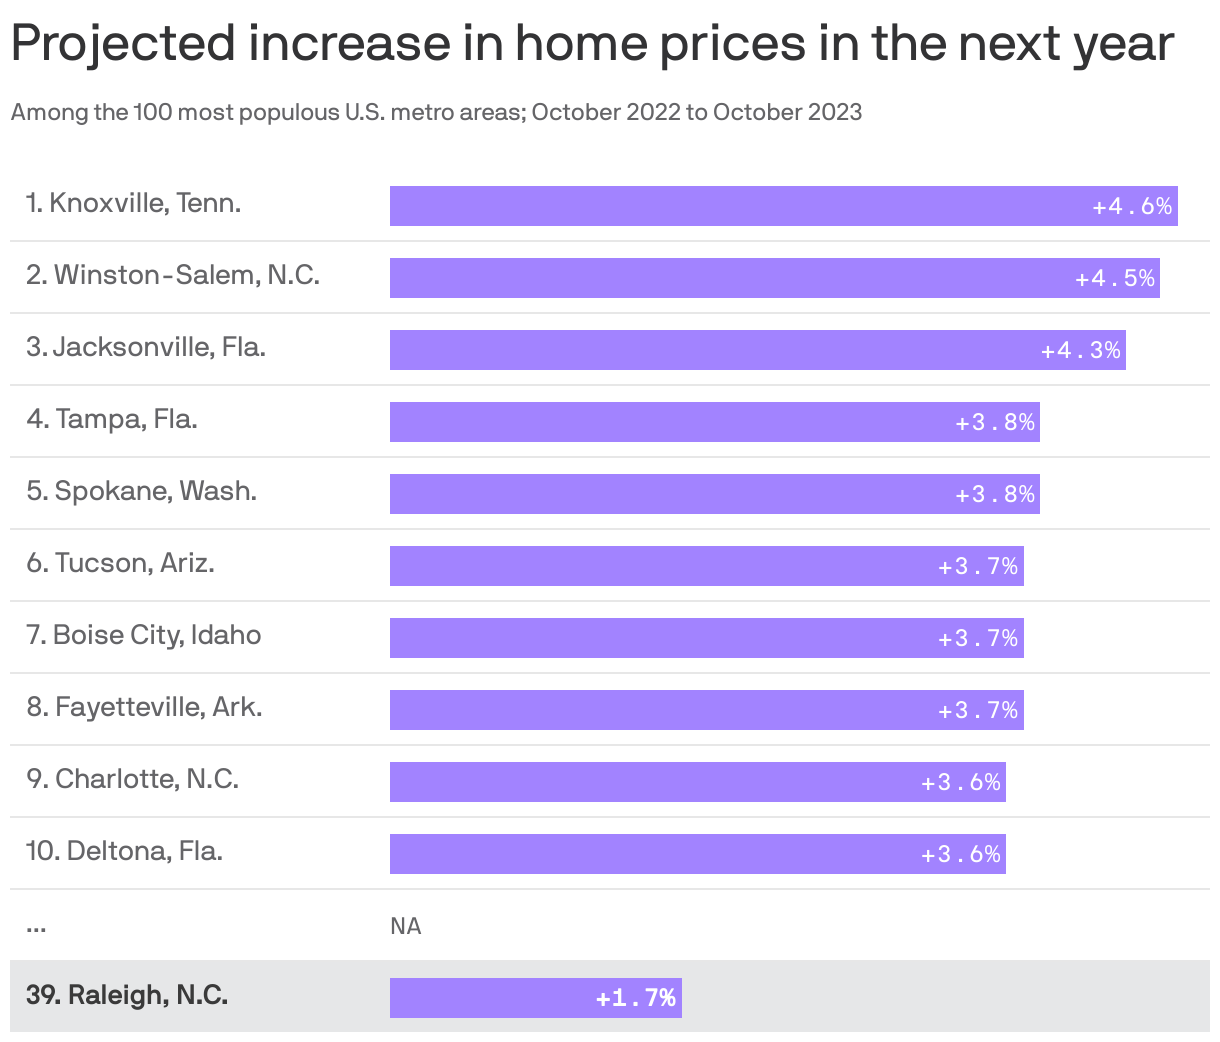 Projected increase in home prices in the next year